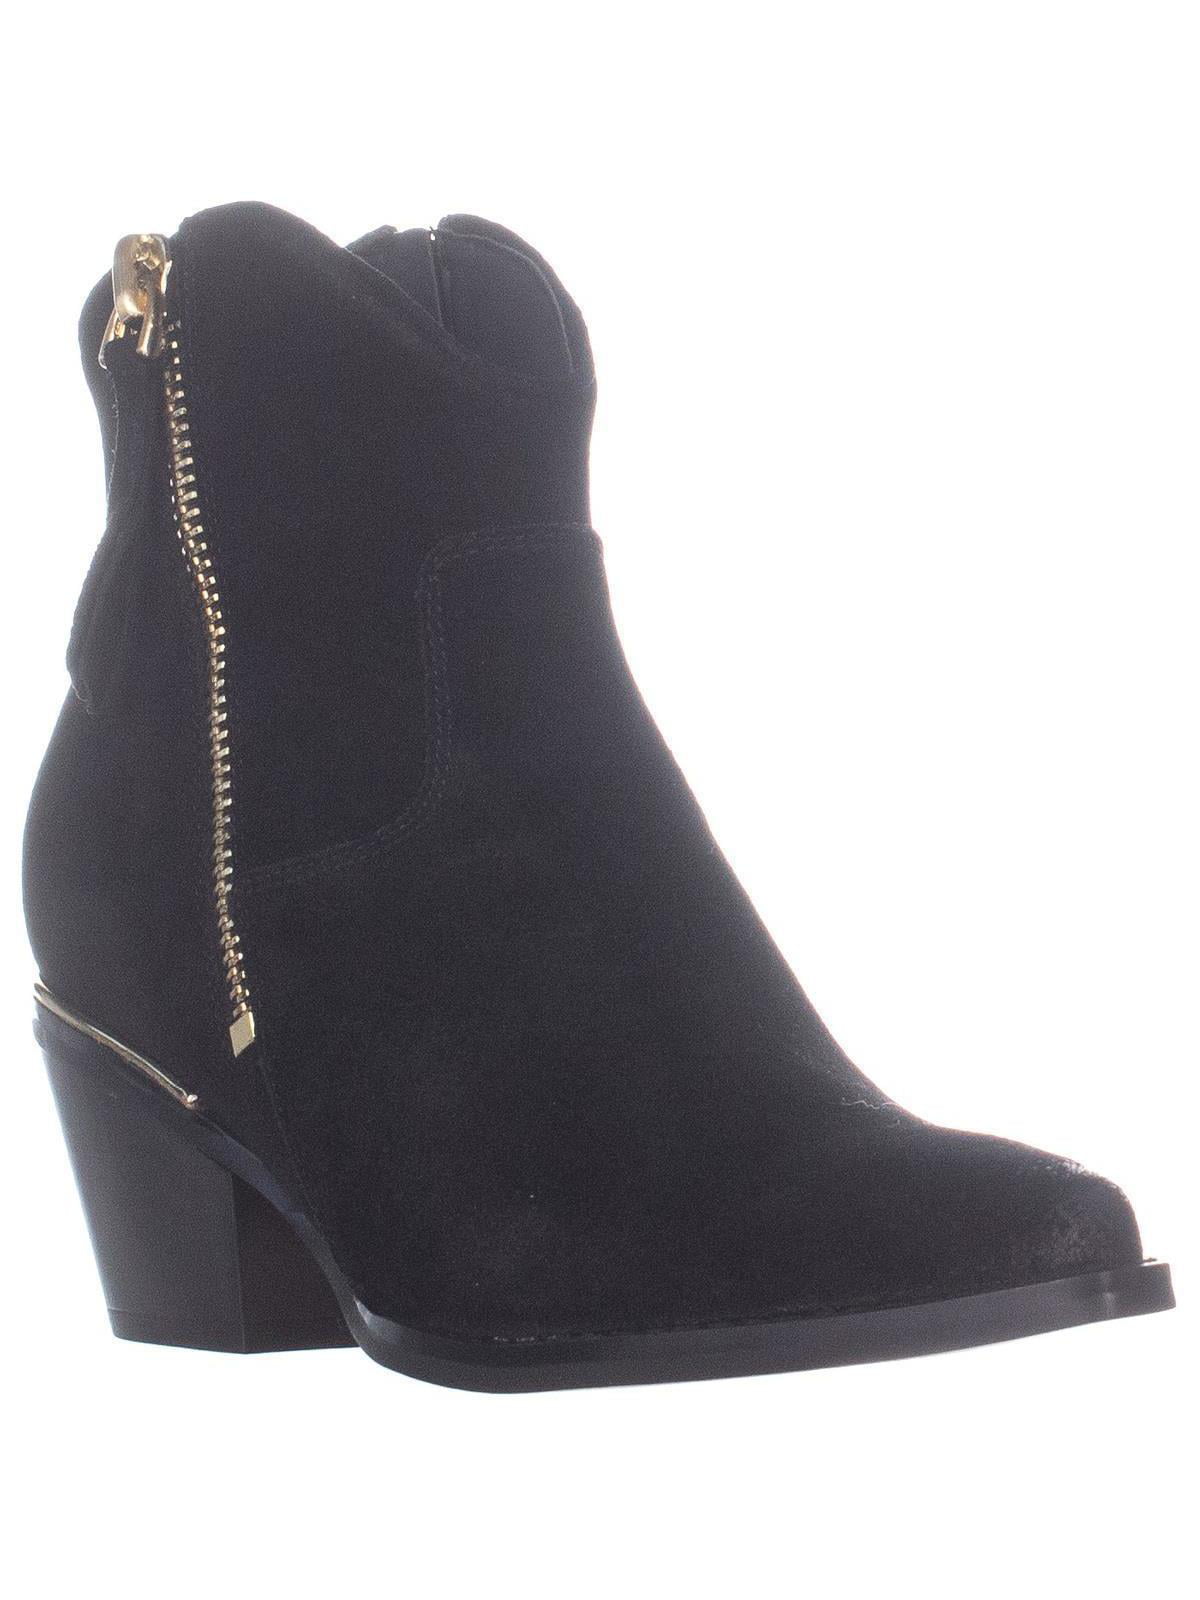 black suede zip ankle boots